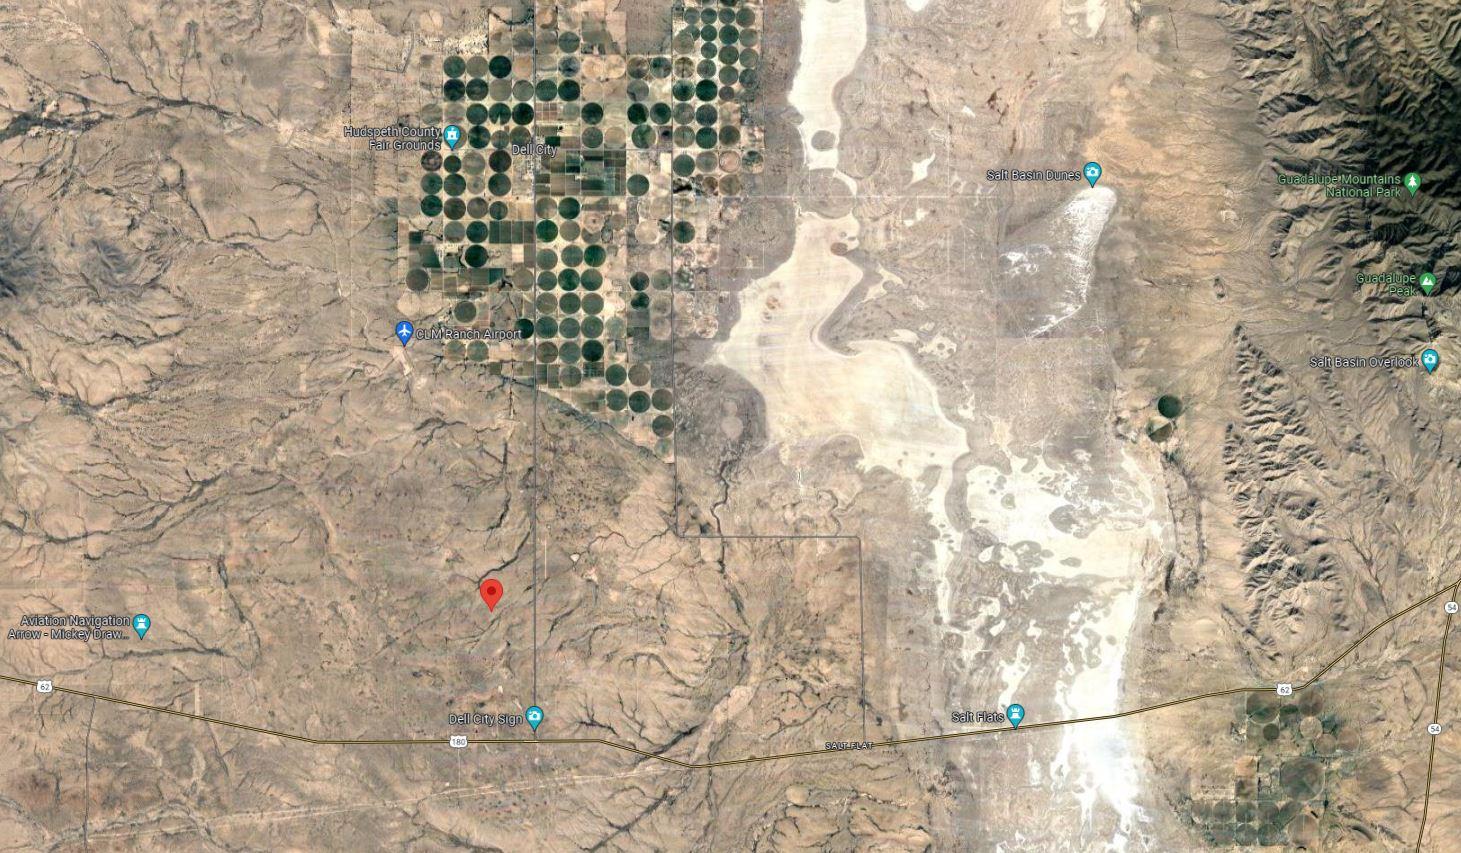 Dell Garden Estates Lot Hudspeth County Texas Great Land Use Options! Low Monthly Payments!